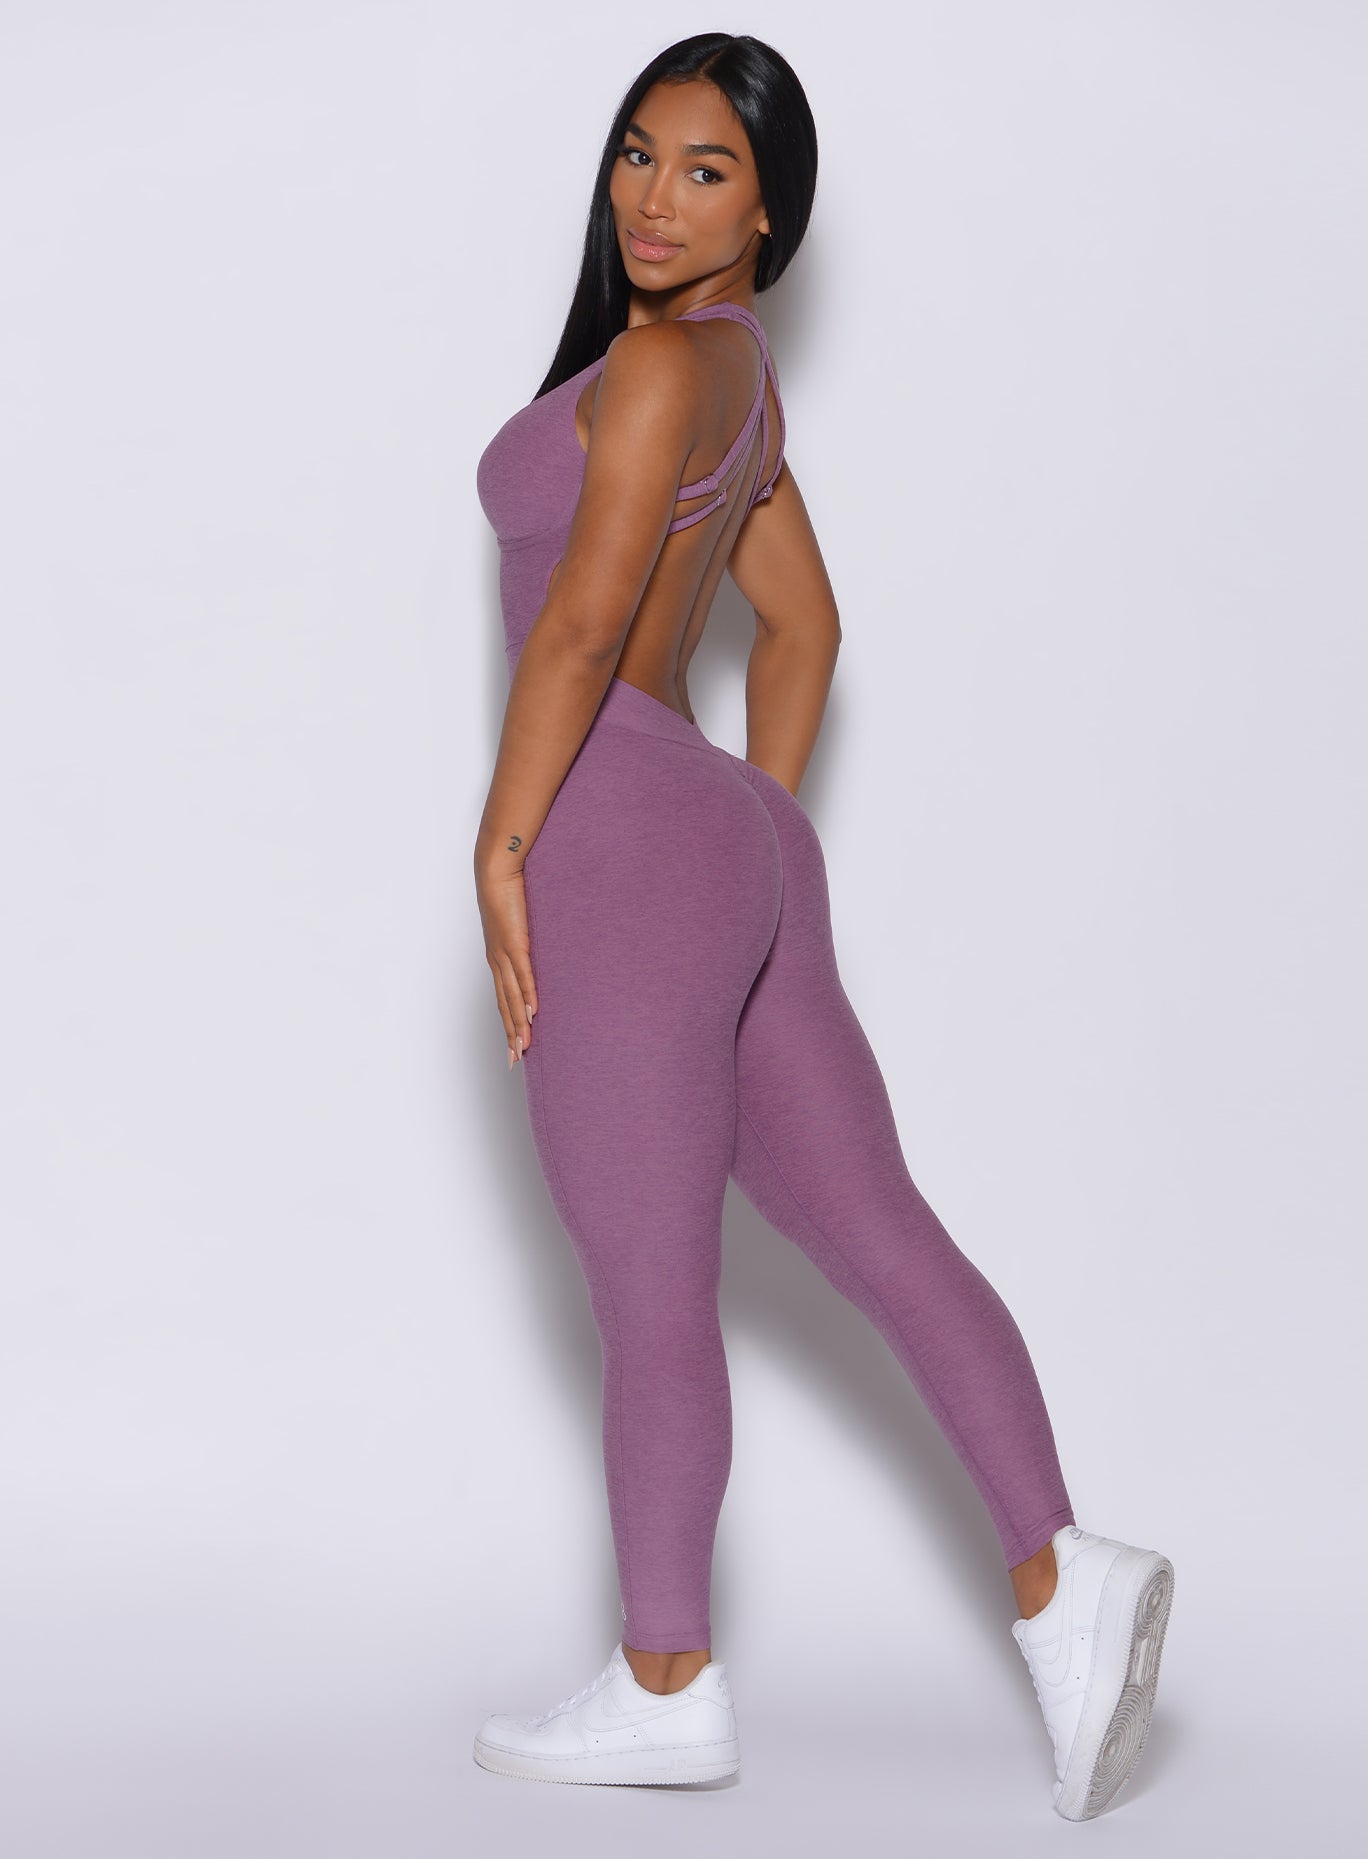 Left side profile view of a model facing to her left wearing our lavender bombshell bodysuit